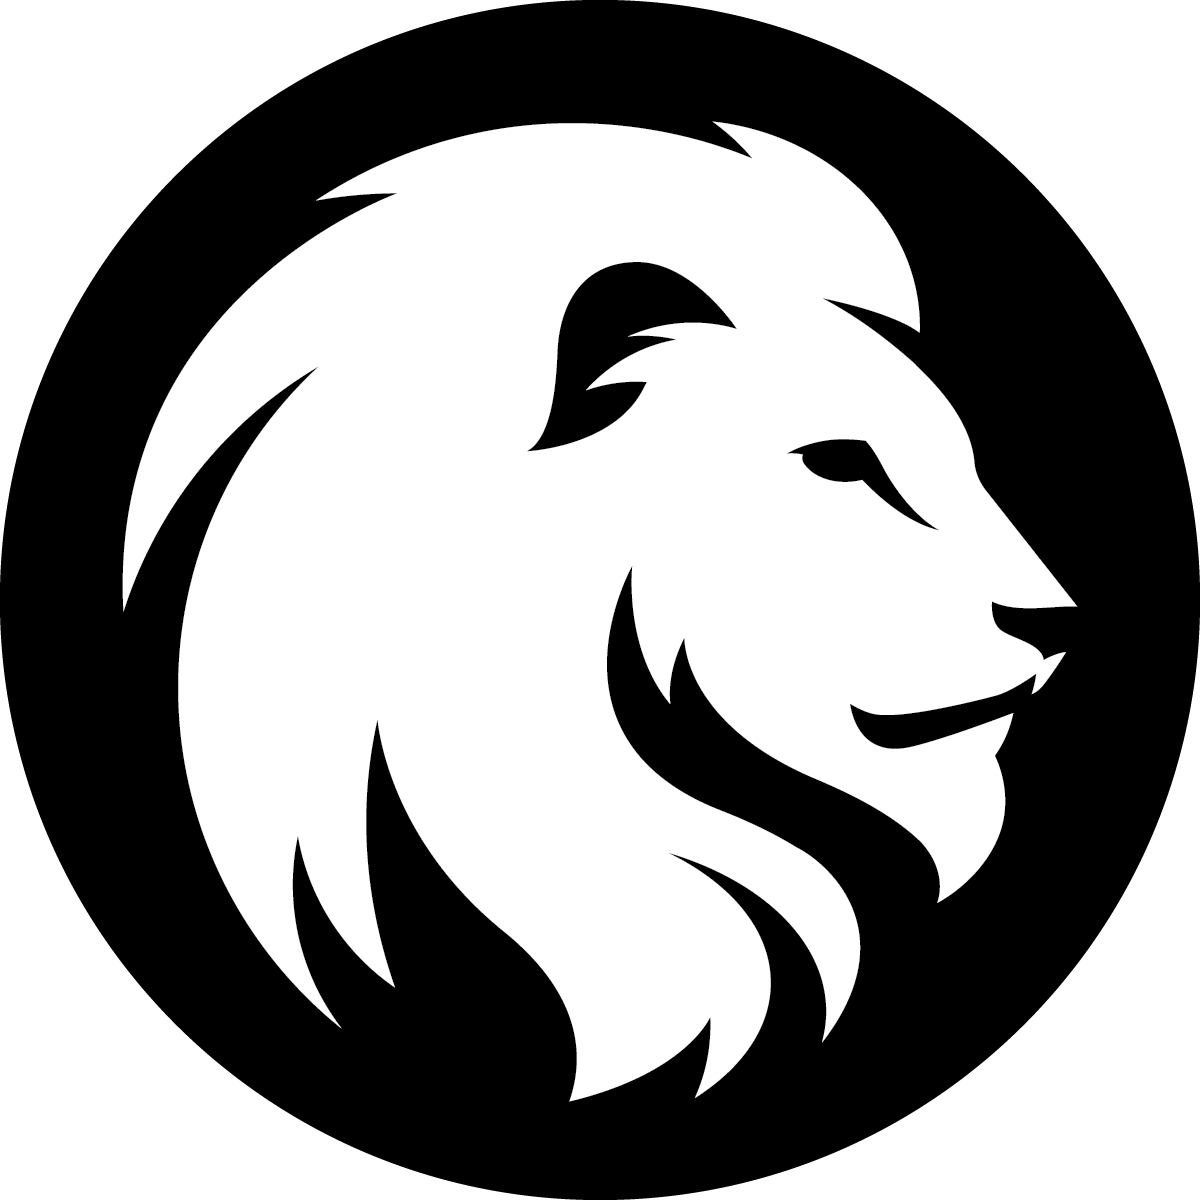 Lion head one color back and white logo.